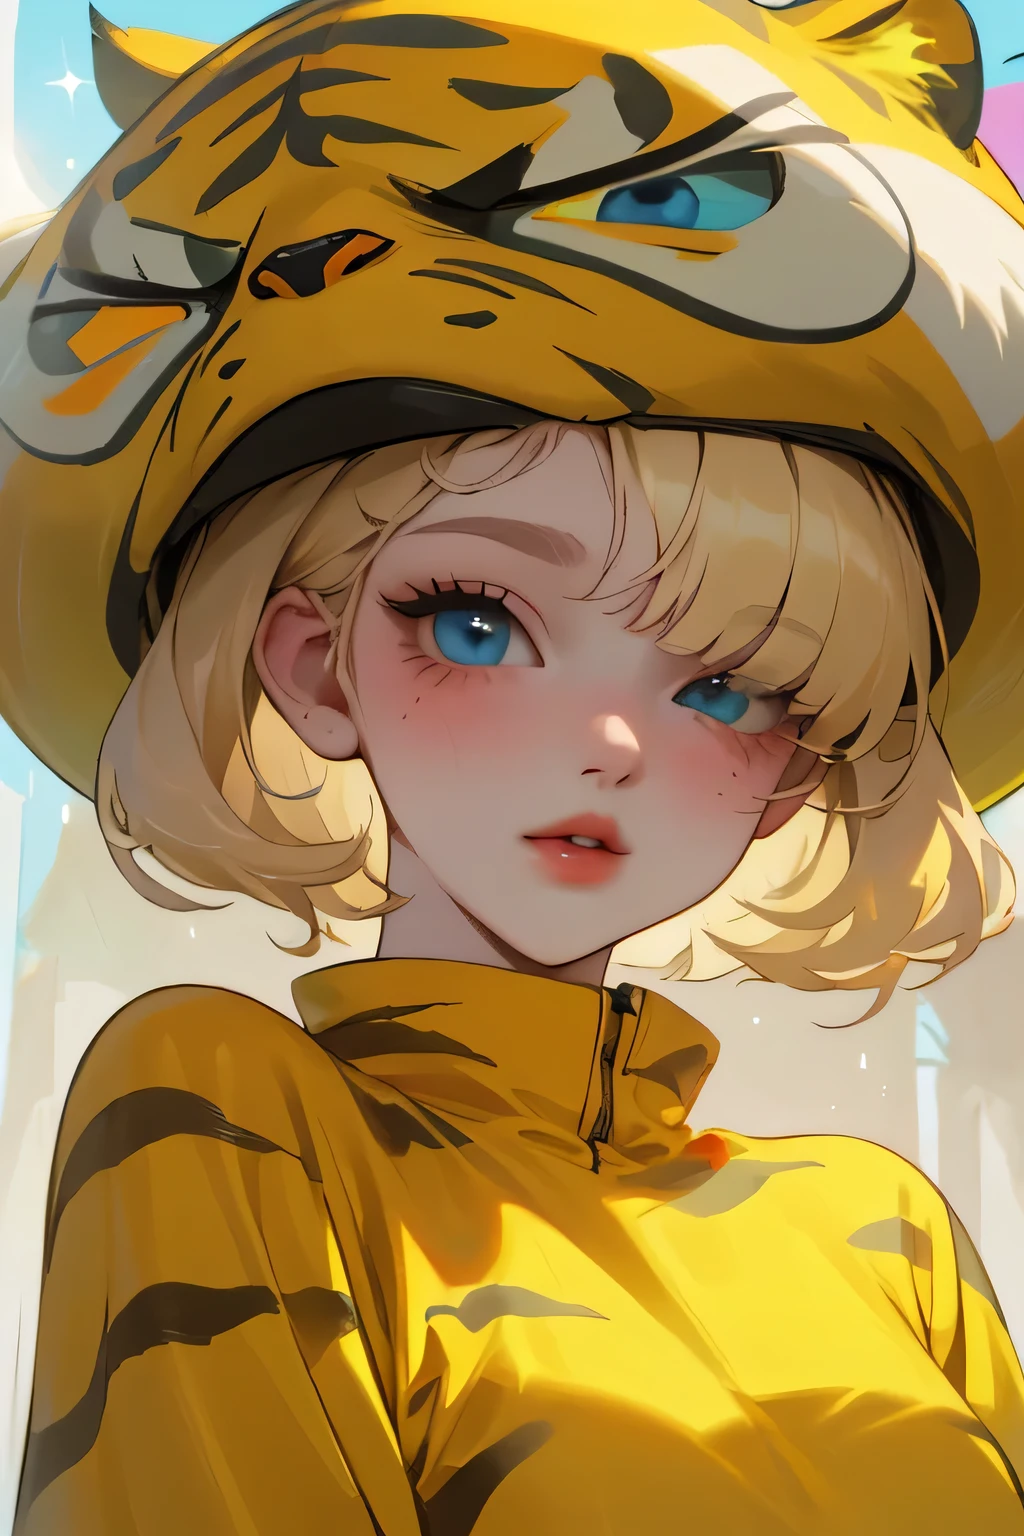 (high quality) (Best Quality) (Una Women) (correct physiognomy) (perfect students) (Perfect eyes) Women, blonde hair with bangs on the forehead, eyes with heterochromia dos orjs, one eye green and the other gold, sensitive lips, female appearance, soft facial features, thin eyebrows, soft skin, rosy cheeks, pink lips, silky eyelashes, dreamy expression, middle age, youth clothing, glitter sweatshirt, tiger print and hat, photo illuminated by sunlight, Women en un campo de girasoles